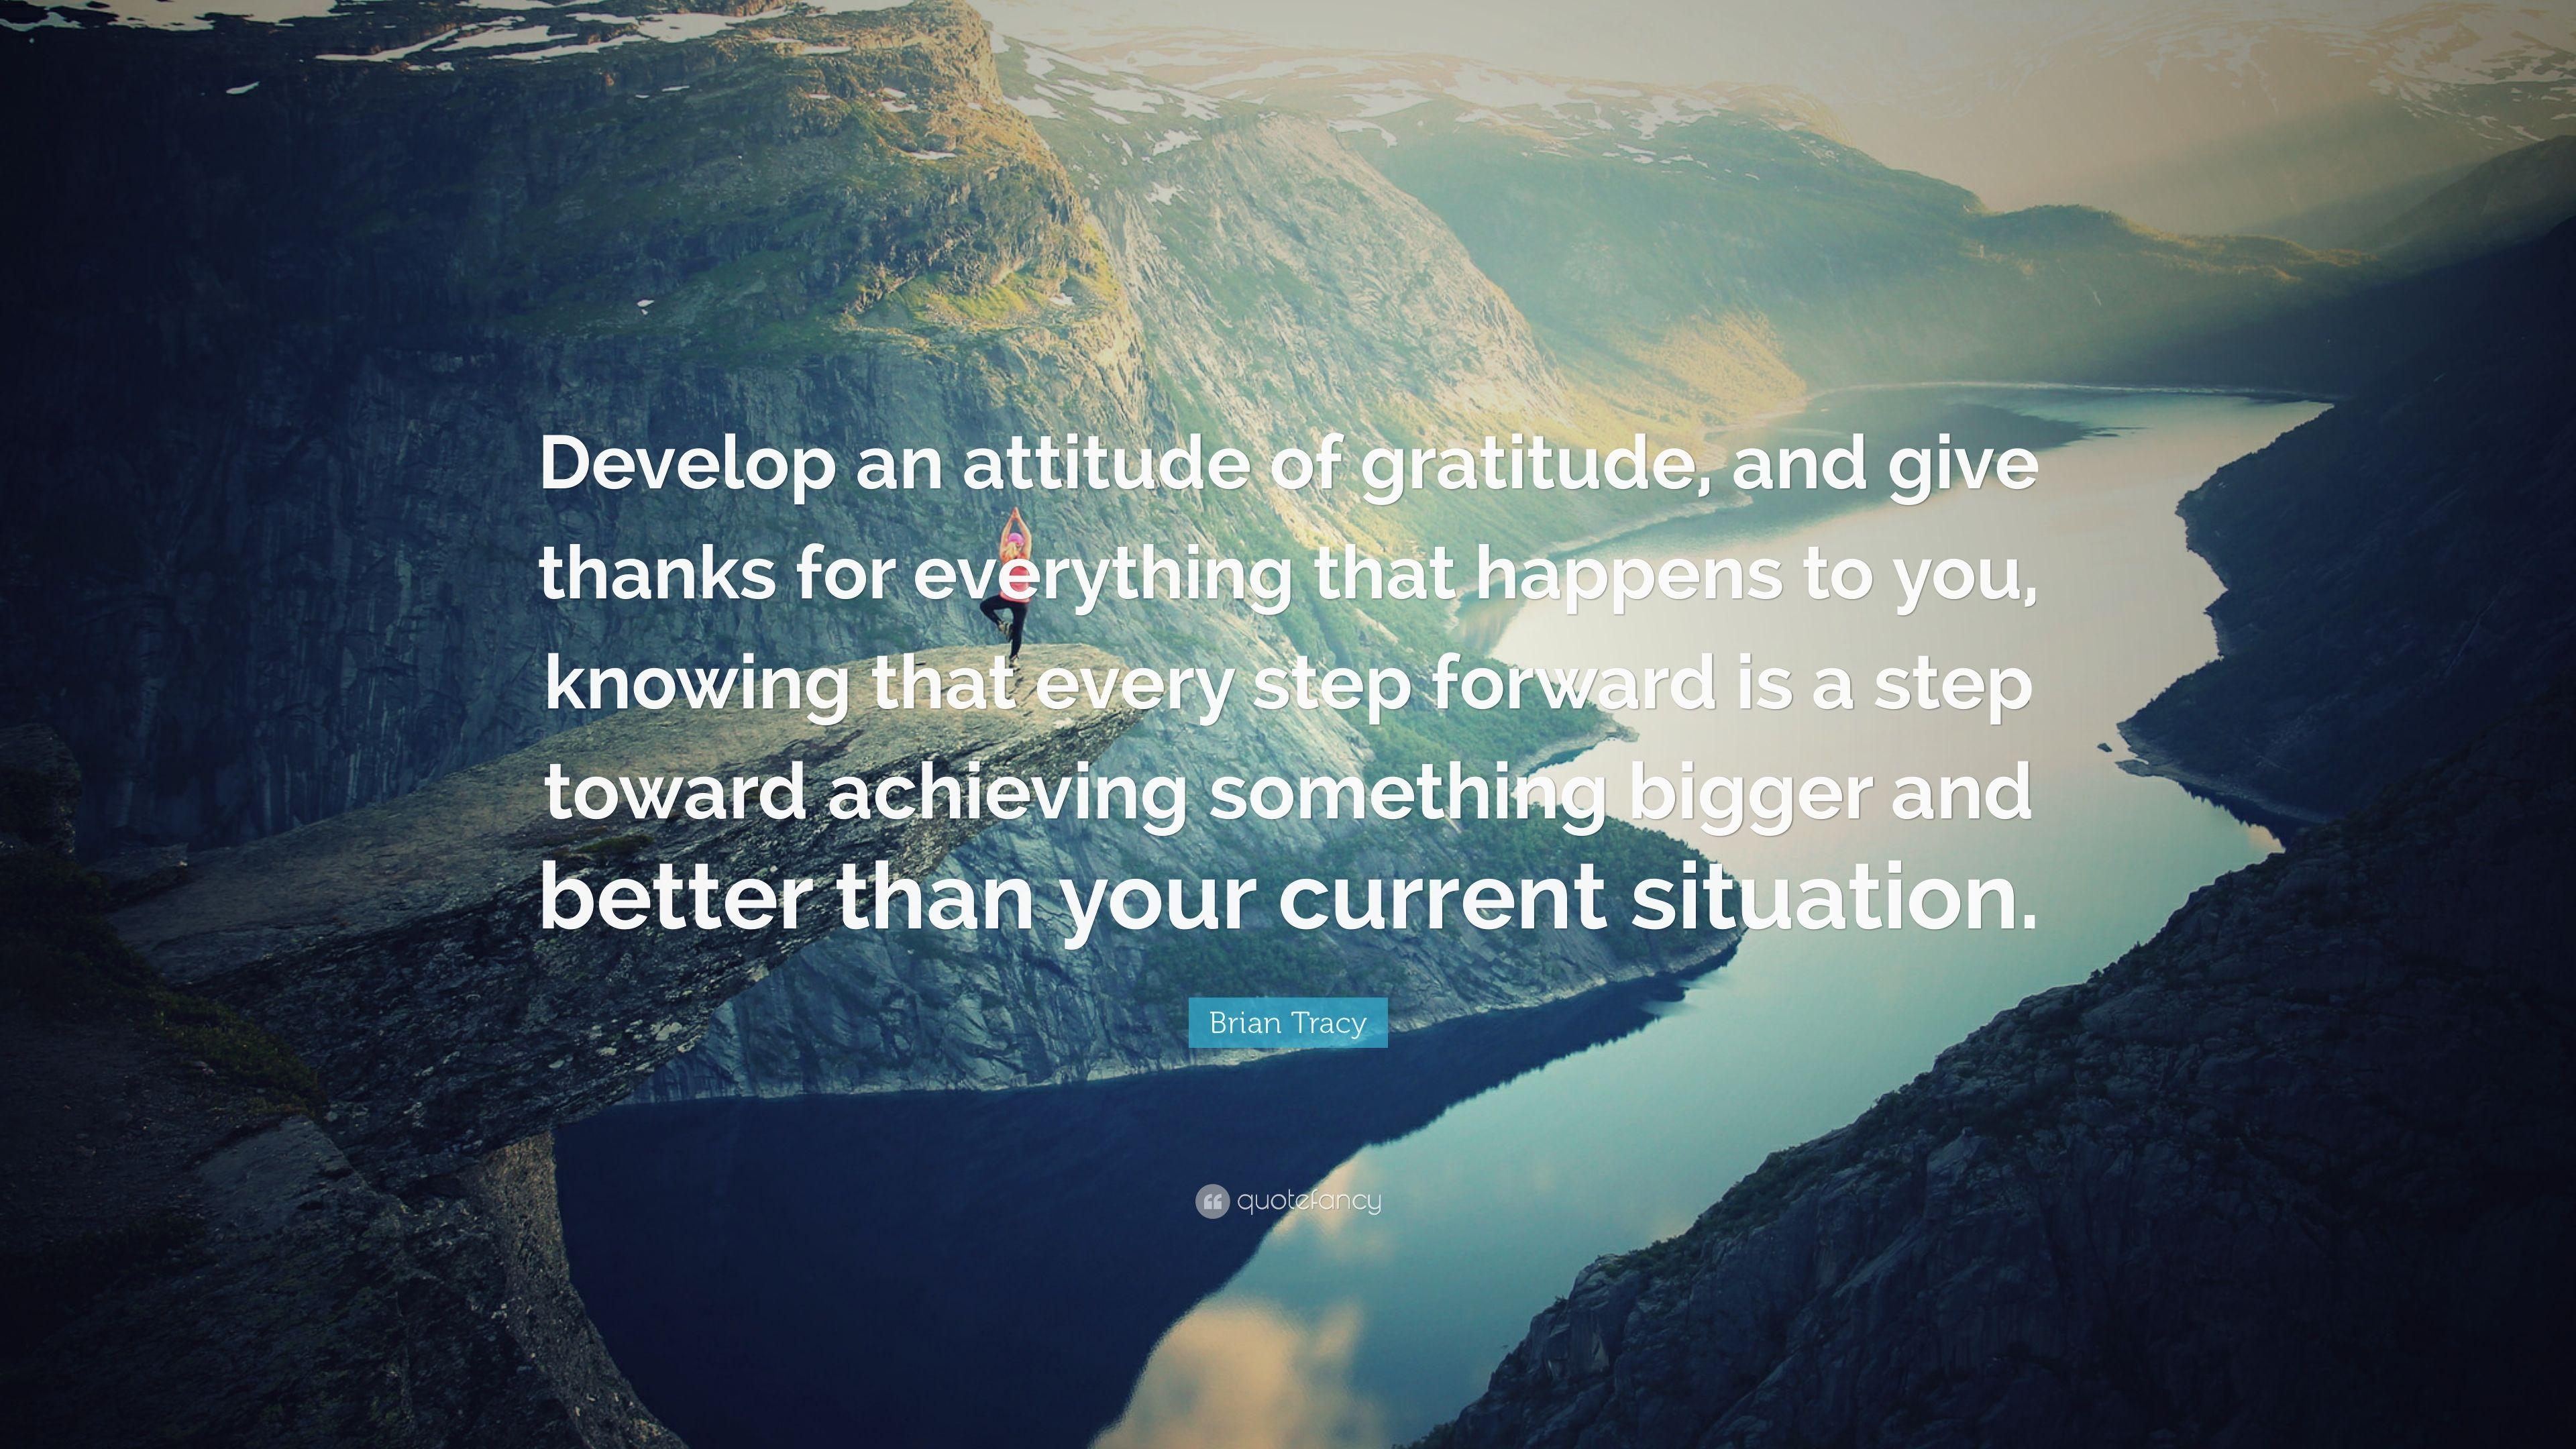 Brian Tracy Quote: “Develop an attitude of gratitude, and give